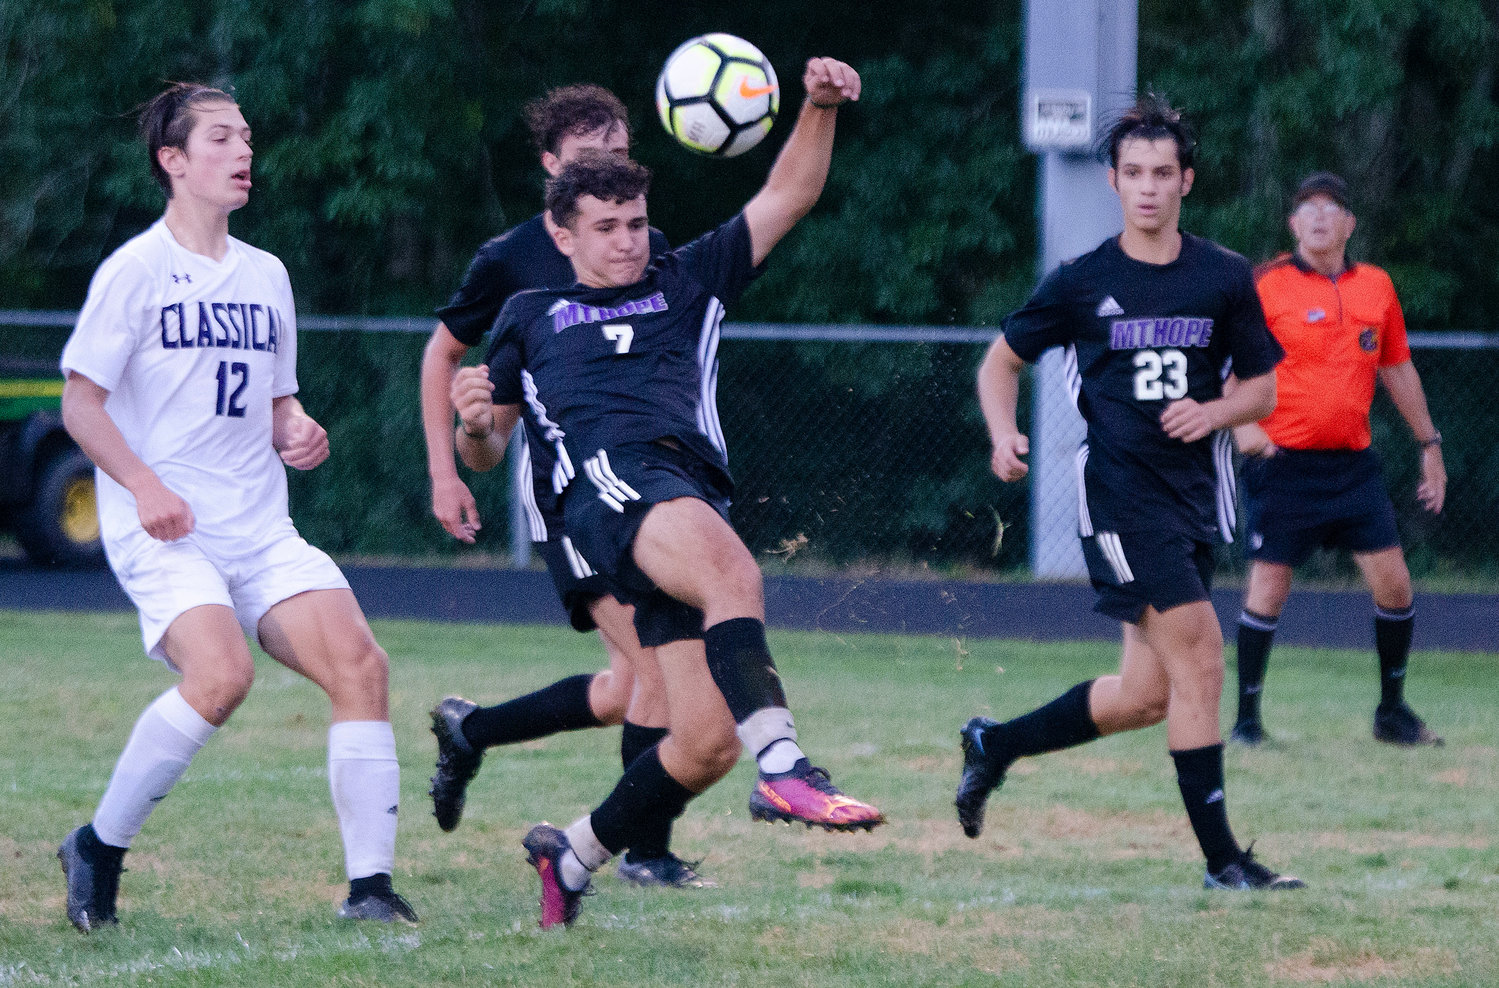 Senior midfielder Parker Camelo attempts to kick in a pass from a free kick late in the game. Jesse Wilson is at right.
Wilson scored the Huskies lone goal to tie the game in the second half.